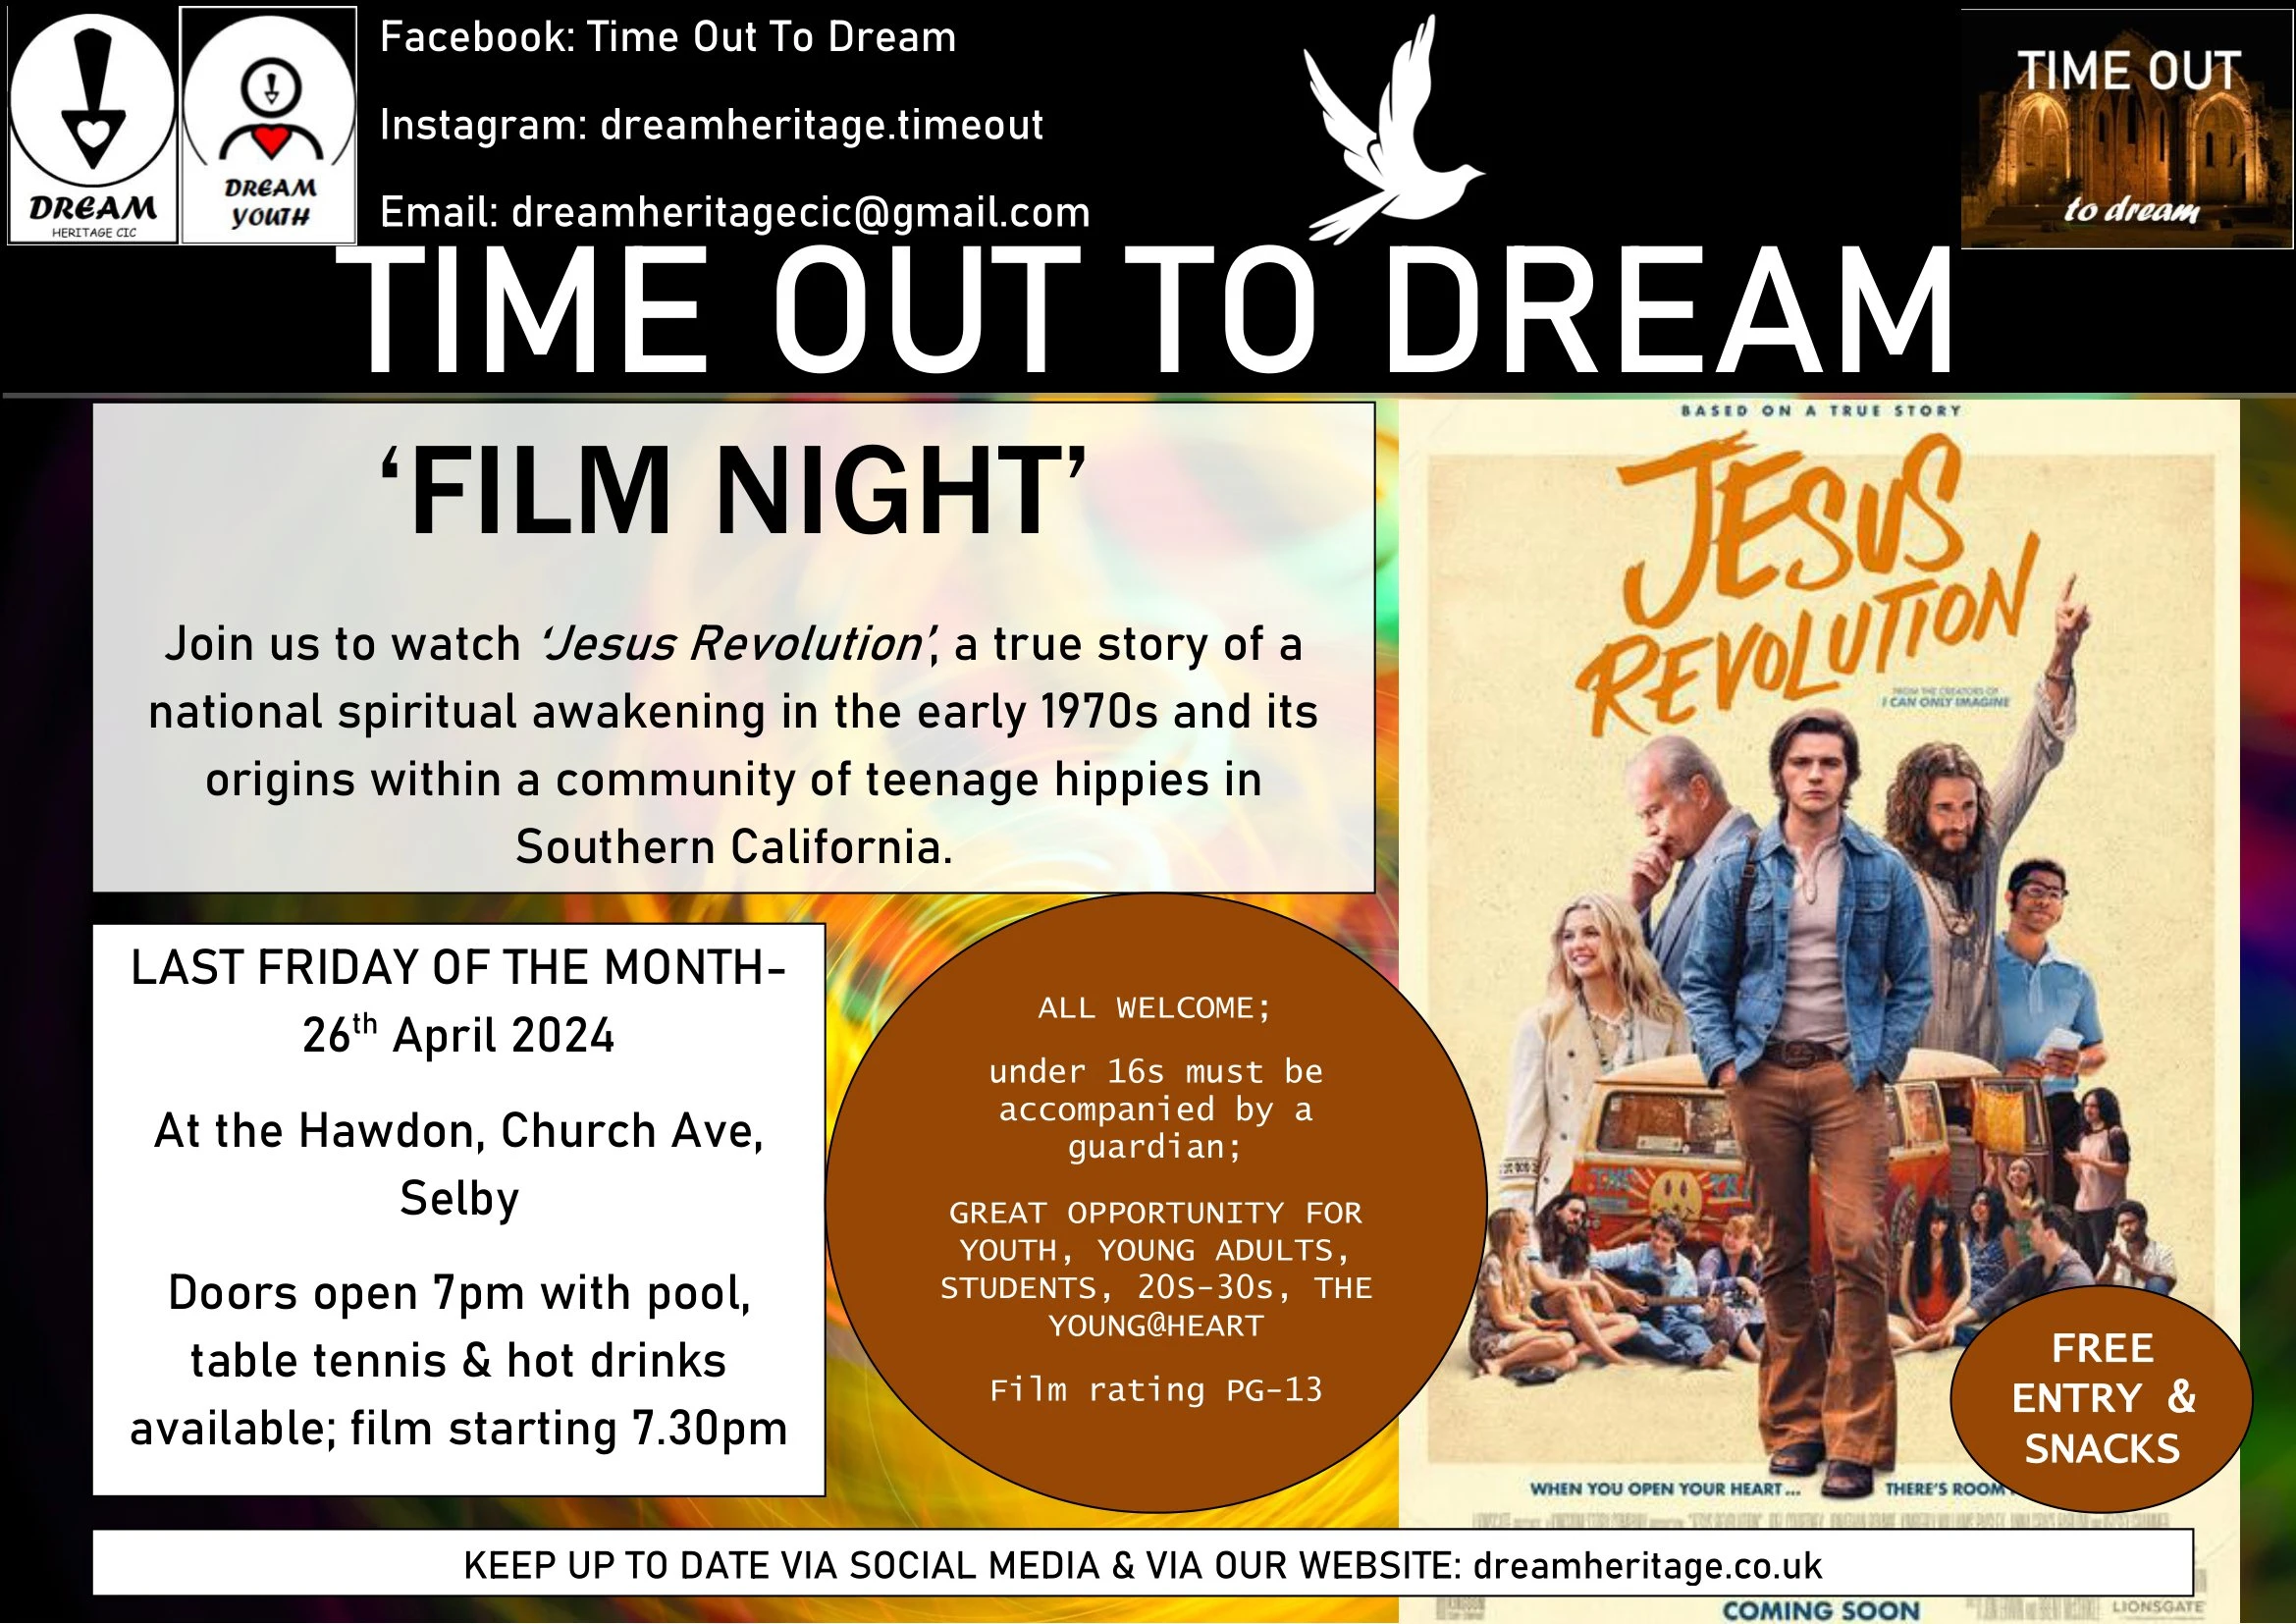 813-time-out-to-dream-26th-april-24-film-night-1-17132648108499.jpg